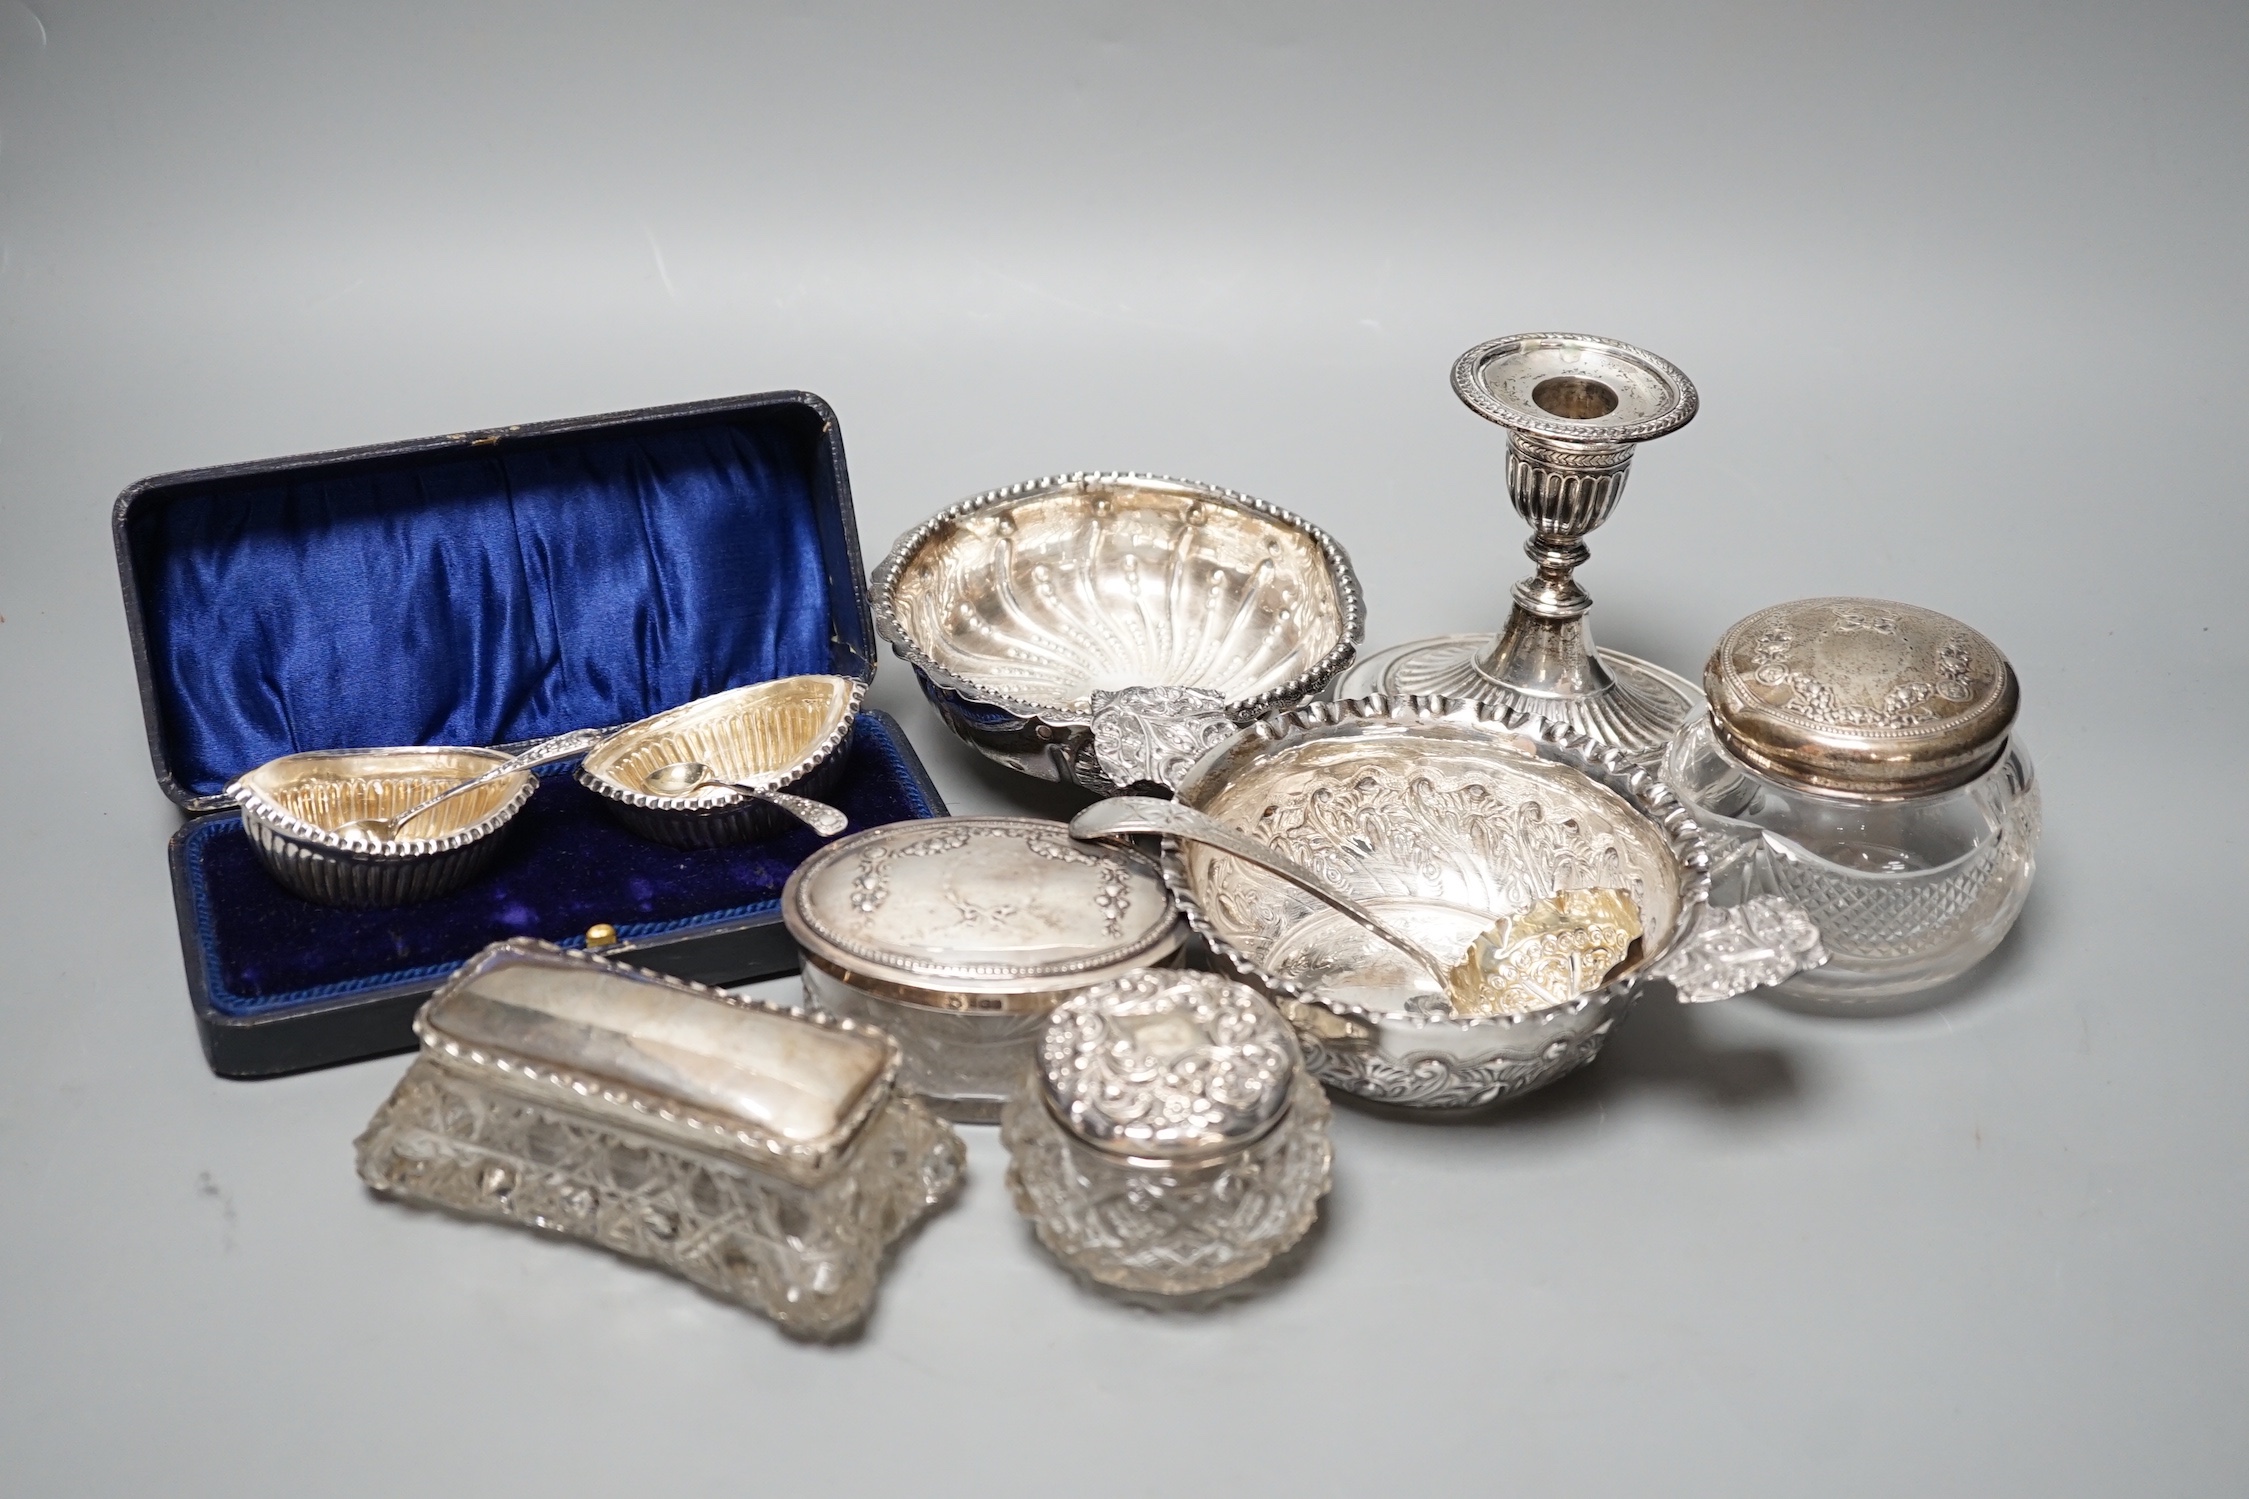 A Victorian repousse silver two handed bowl, one other silver bowl, a silver sifter spoon, four silver mounted glass toilet jars, a silver dwarf candlestick and a cased pair of silver salts.